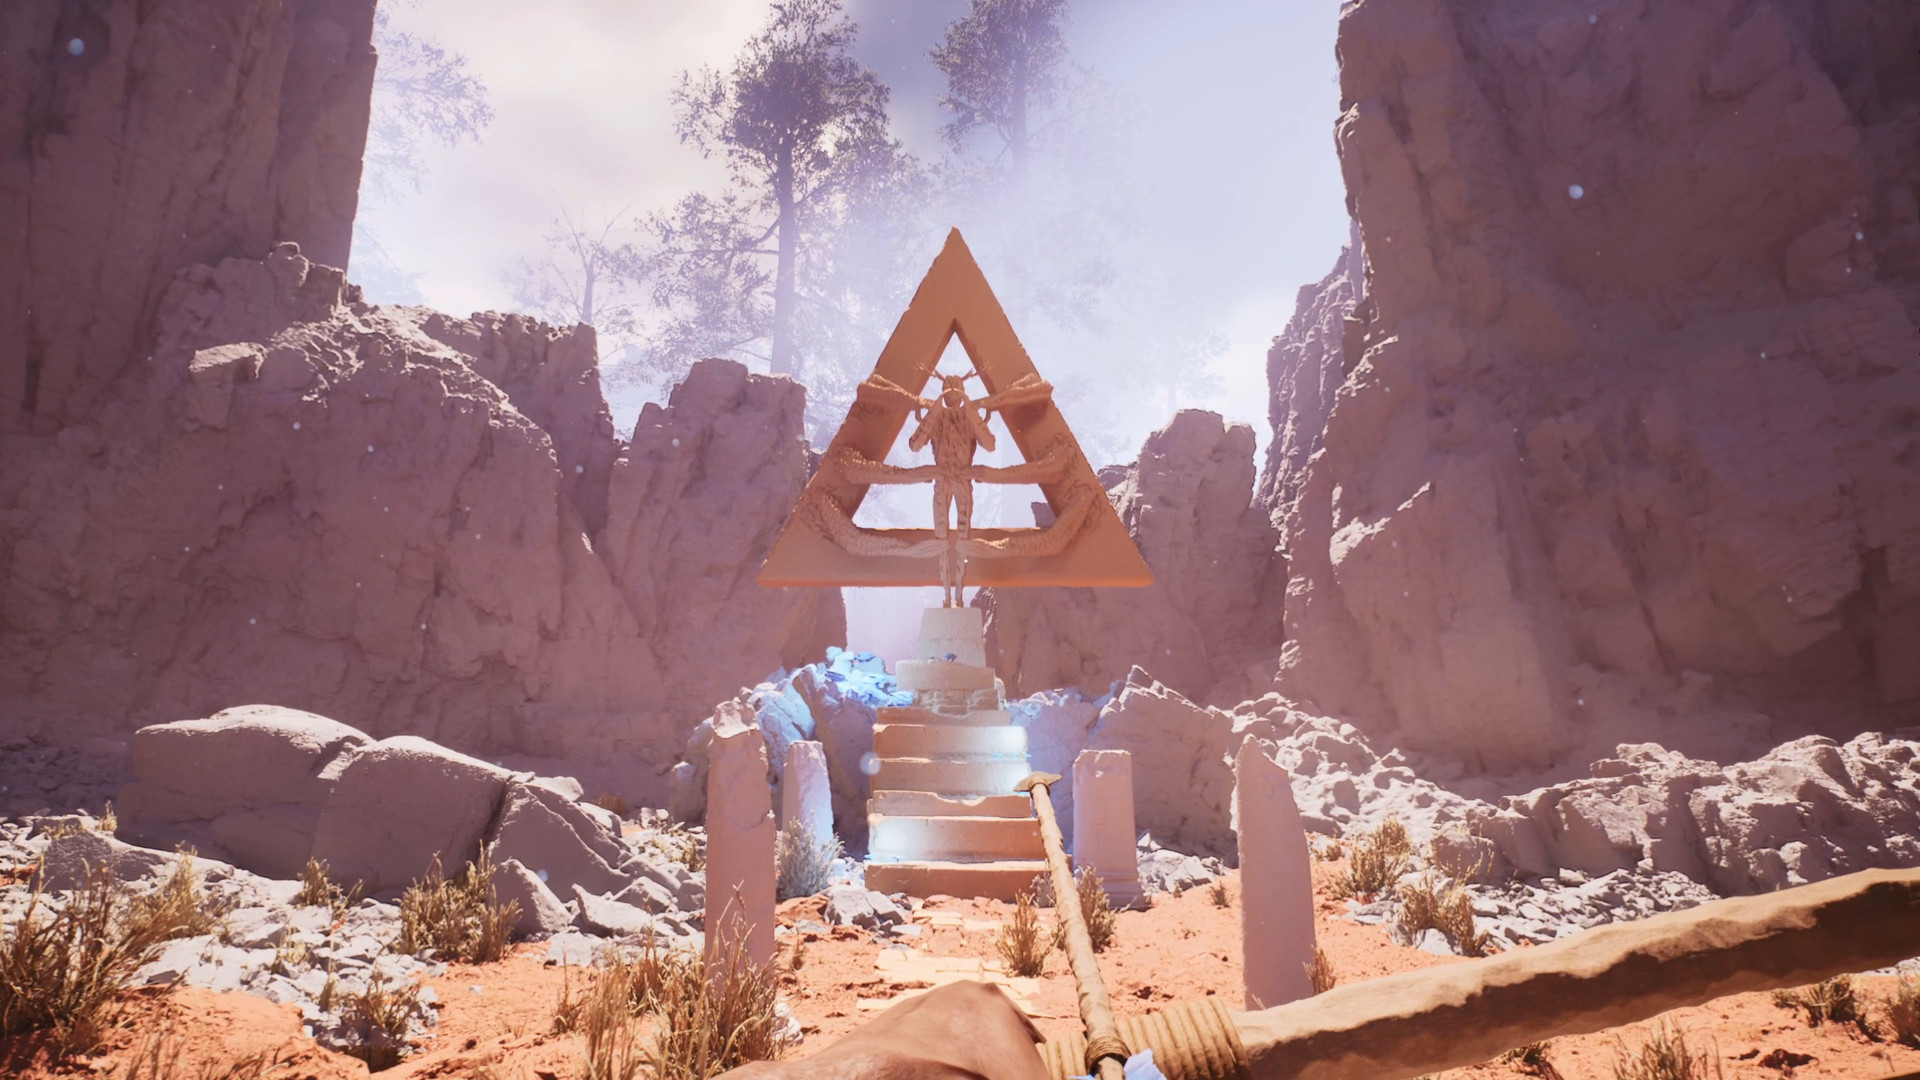 view of a striking, triangular sculpture of man being held down by reptilian claws at the top of a stairway to nowhere, all in the center of this red clay canyon